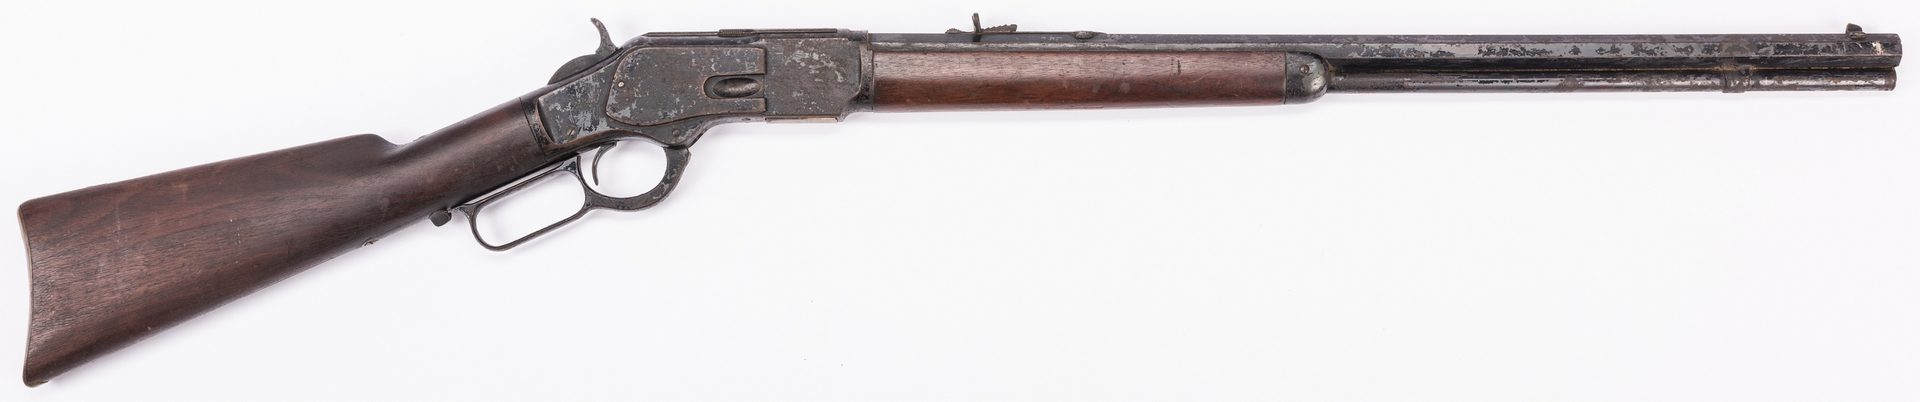 Lot 795: Winchester Model 1873, 32-20 Win Lever Action Rifle